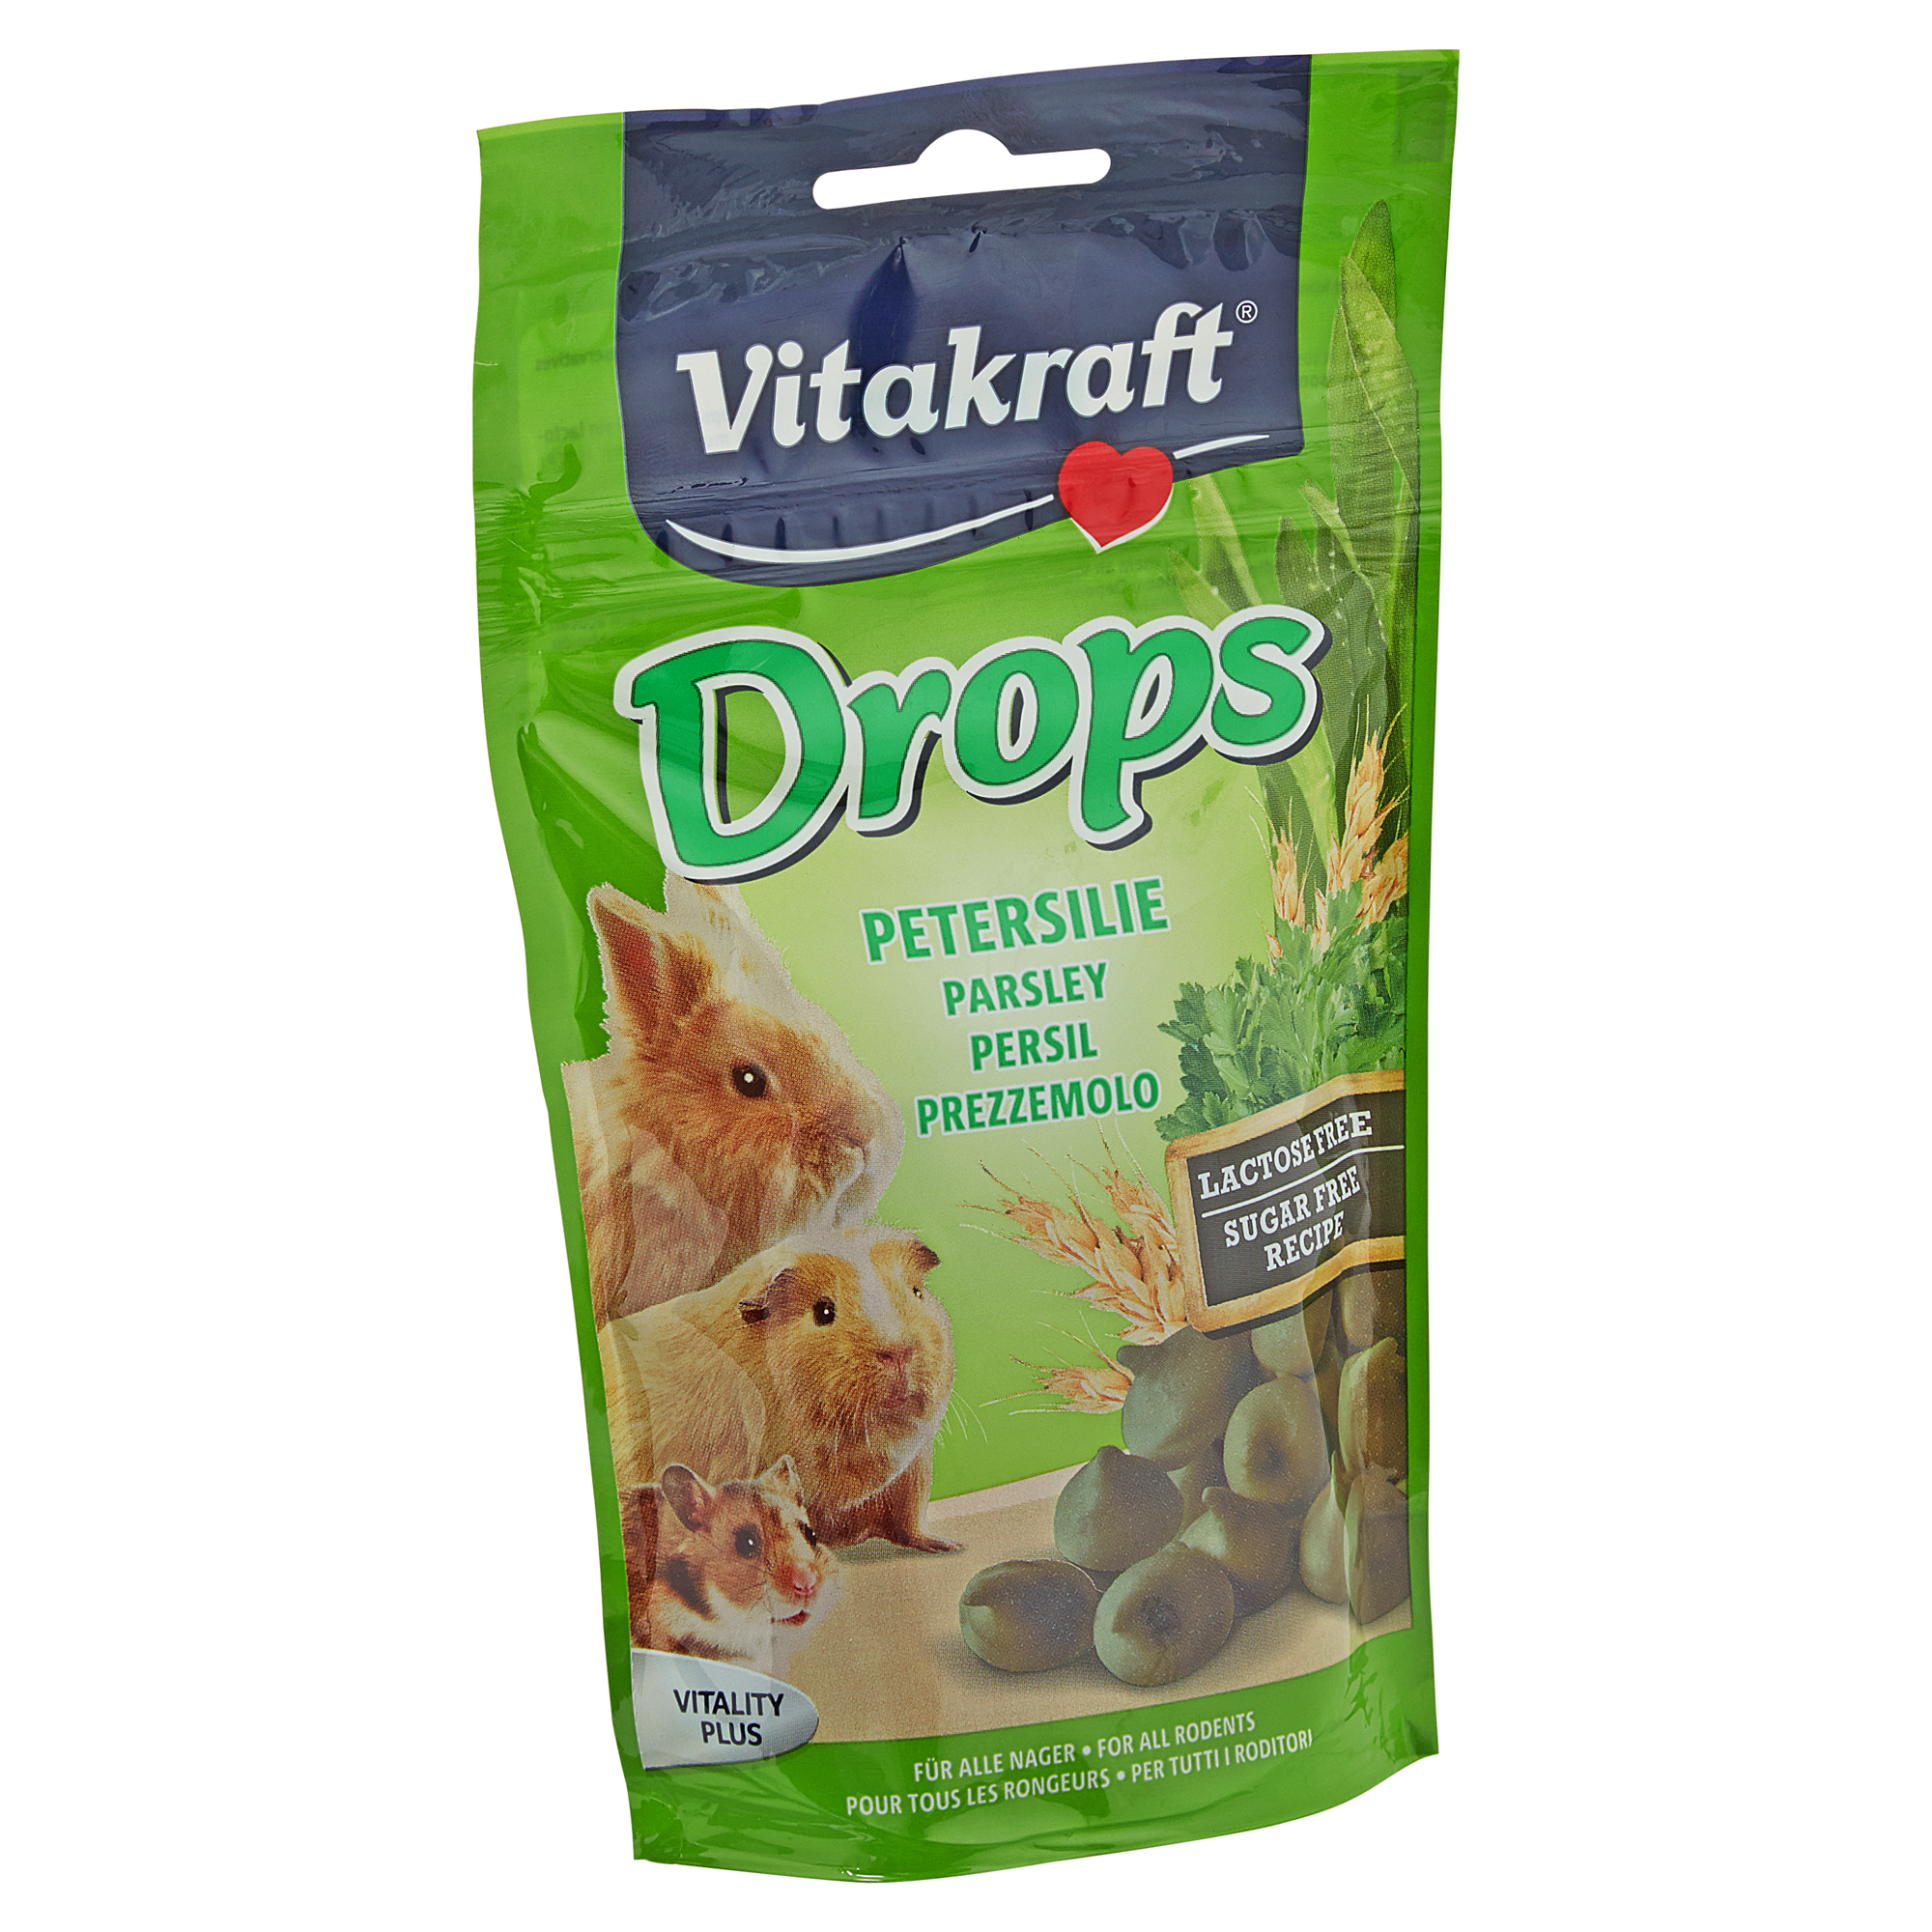 Drops für Nagetiere 75 g Petersilie + product picture